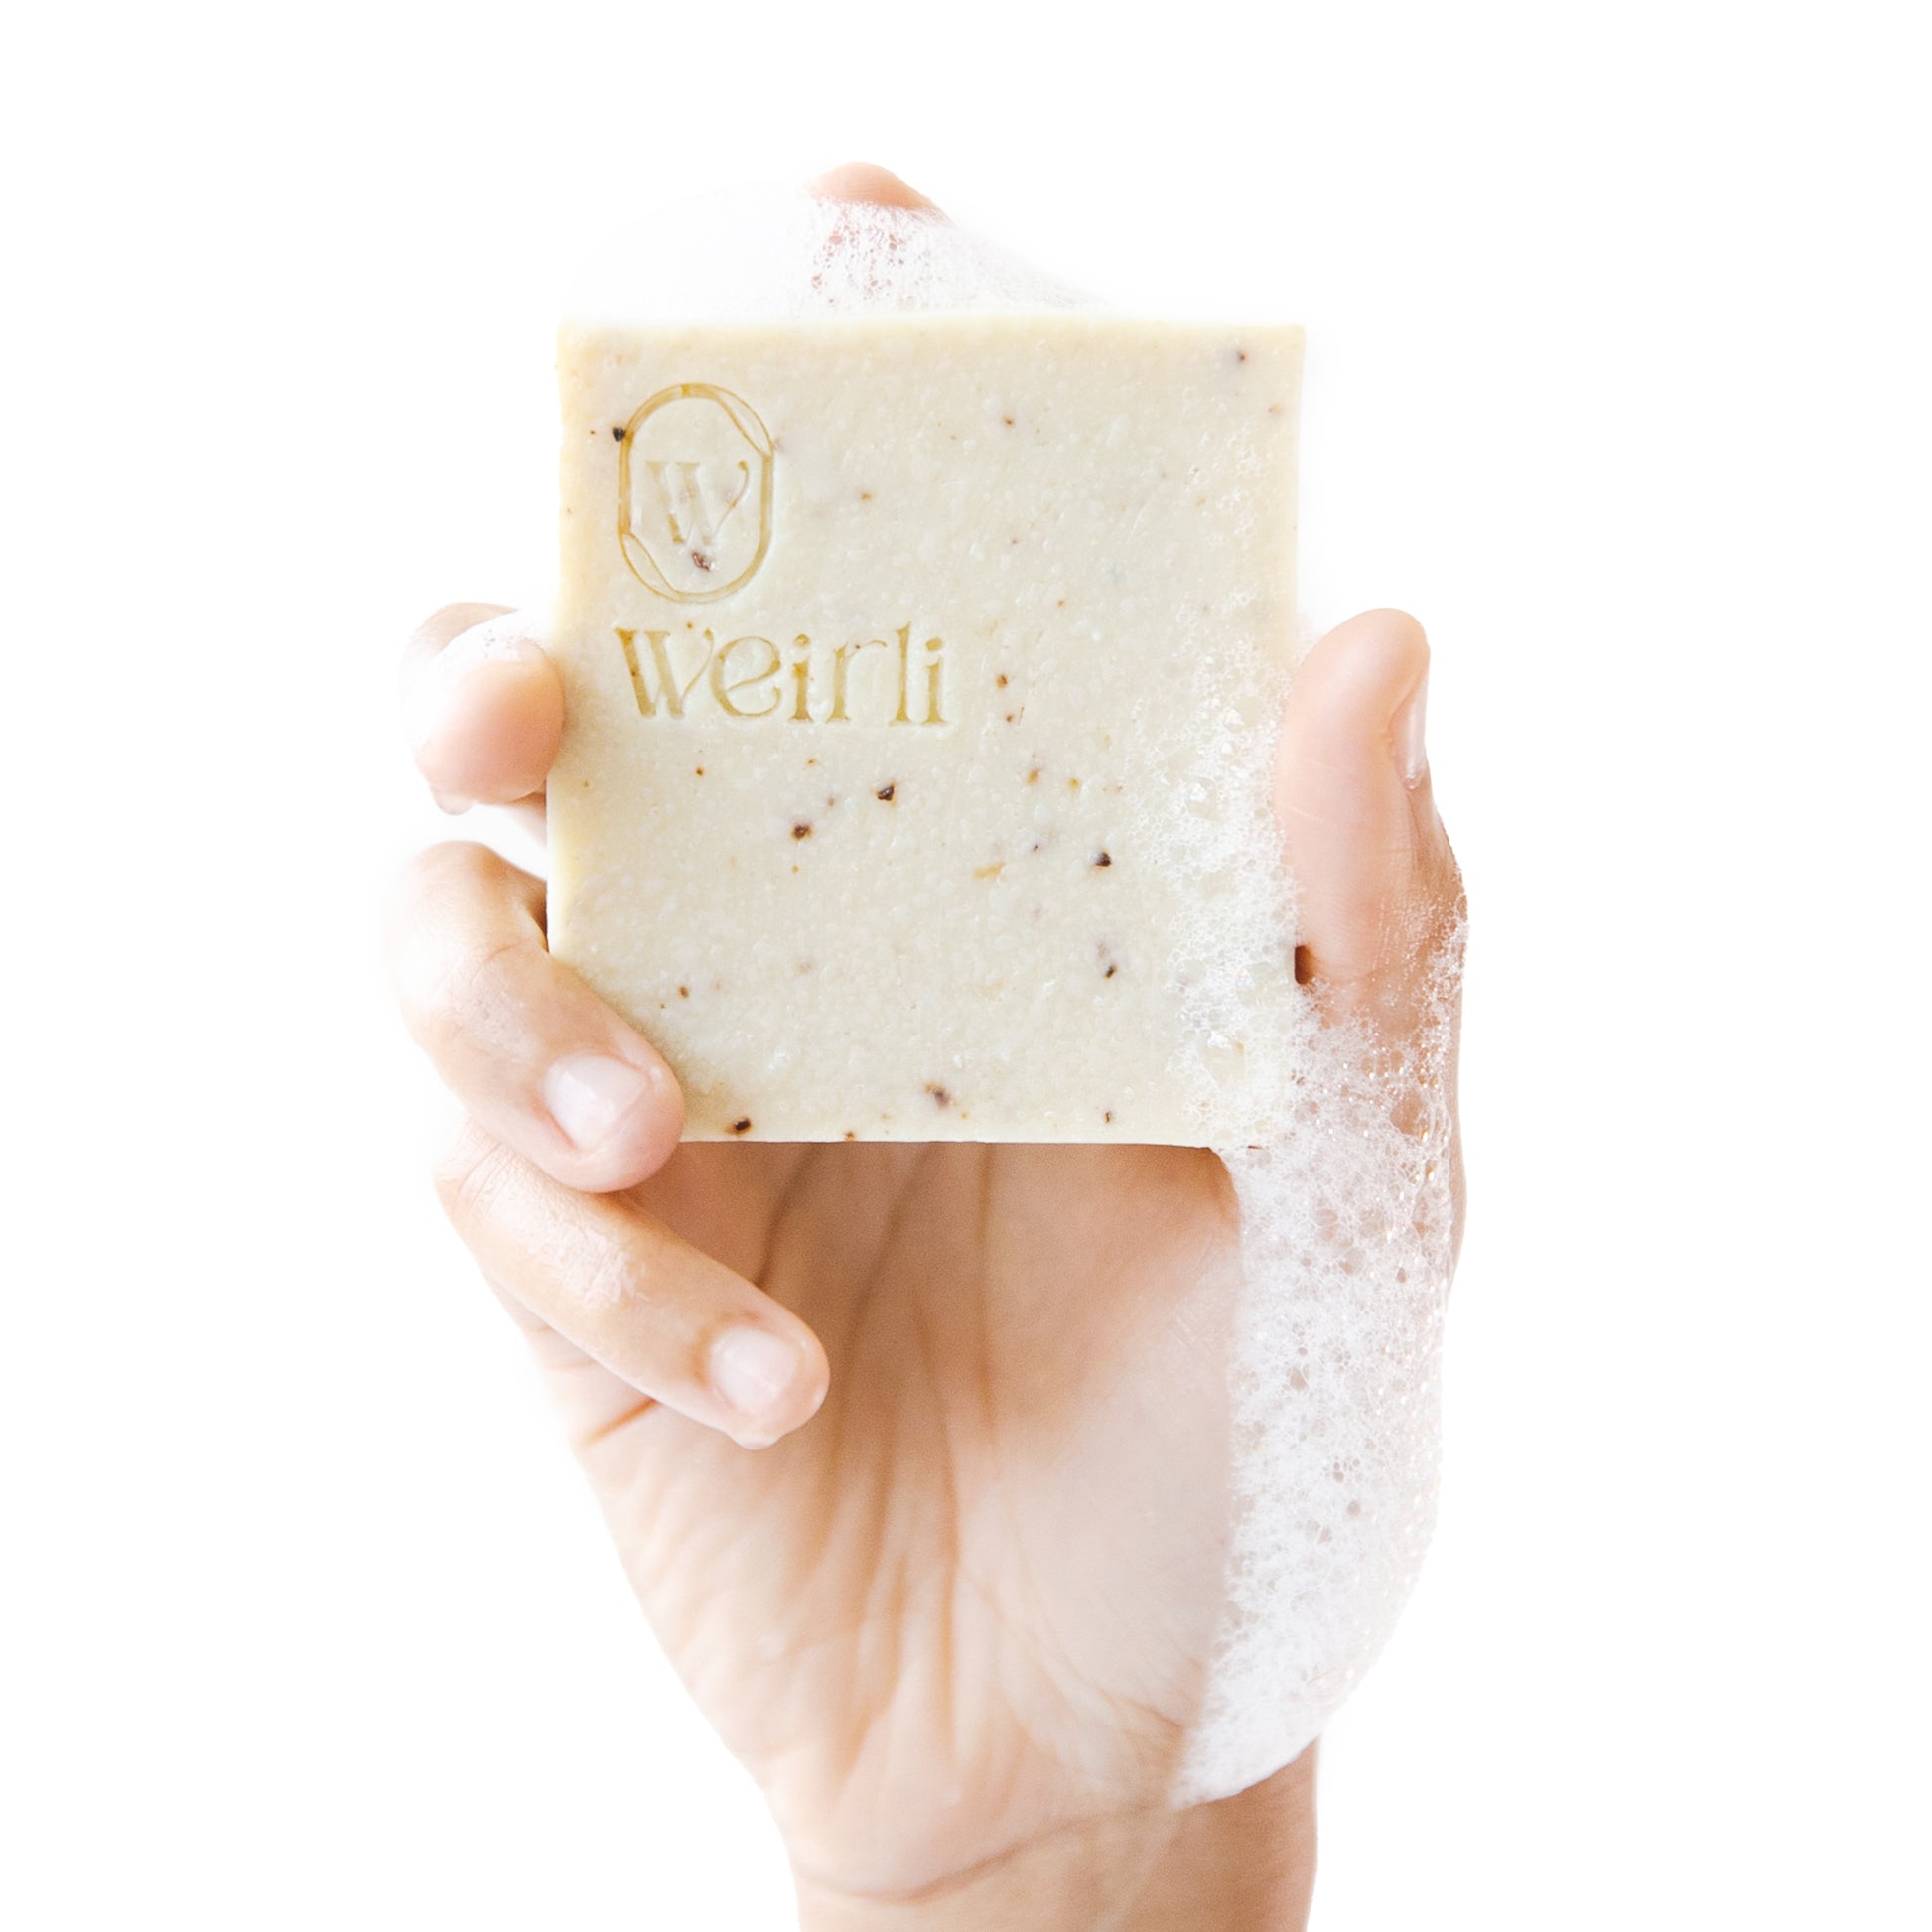 Soapy rice and black pepper soap square held up by a hand